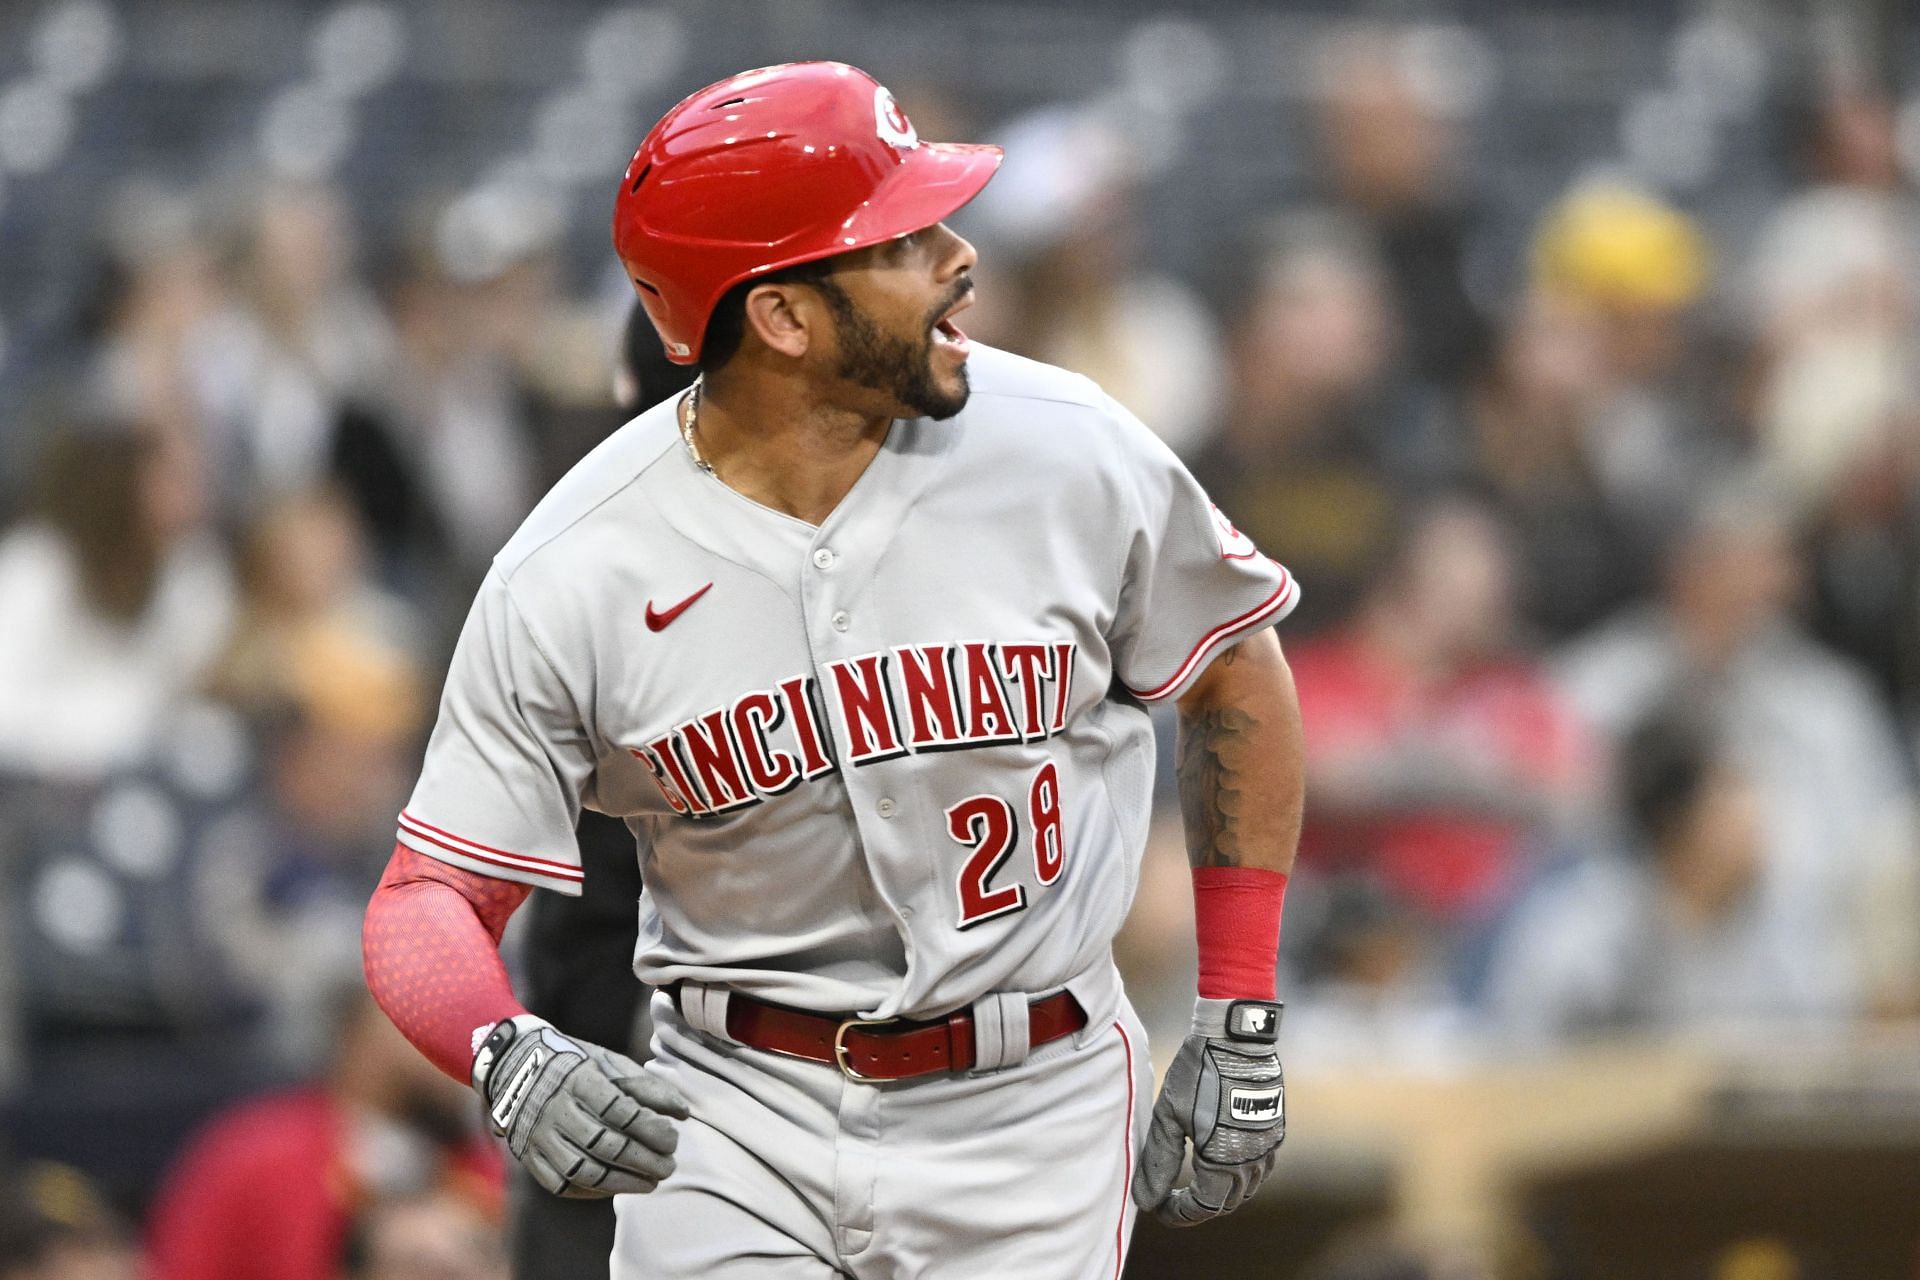 Reds' Tommy Pham challenges Padres 1B Luke Voit to unarmed combat